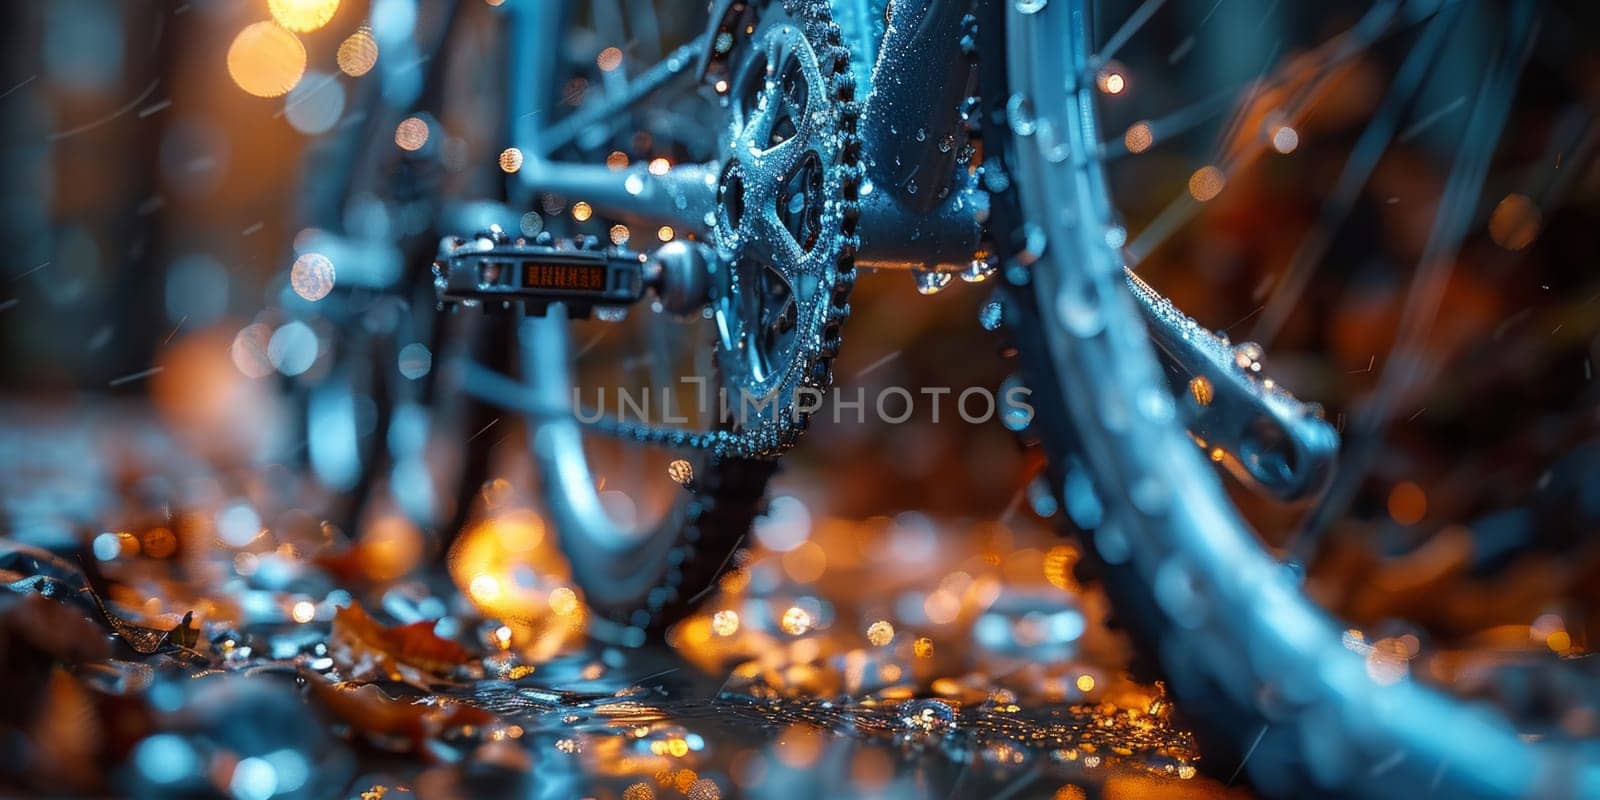 A close-up view of a bike covered in water droplets.